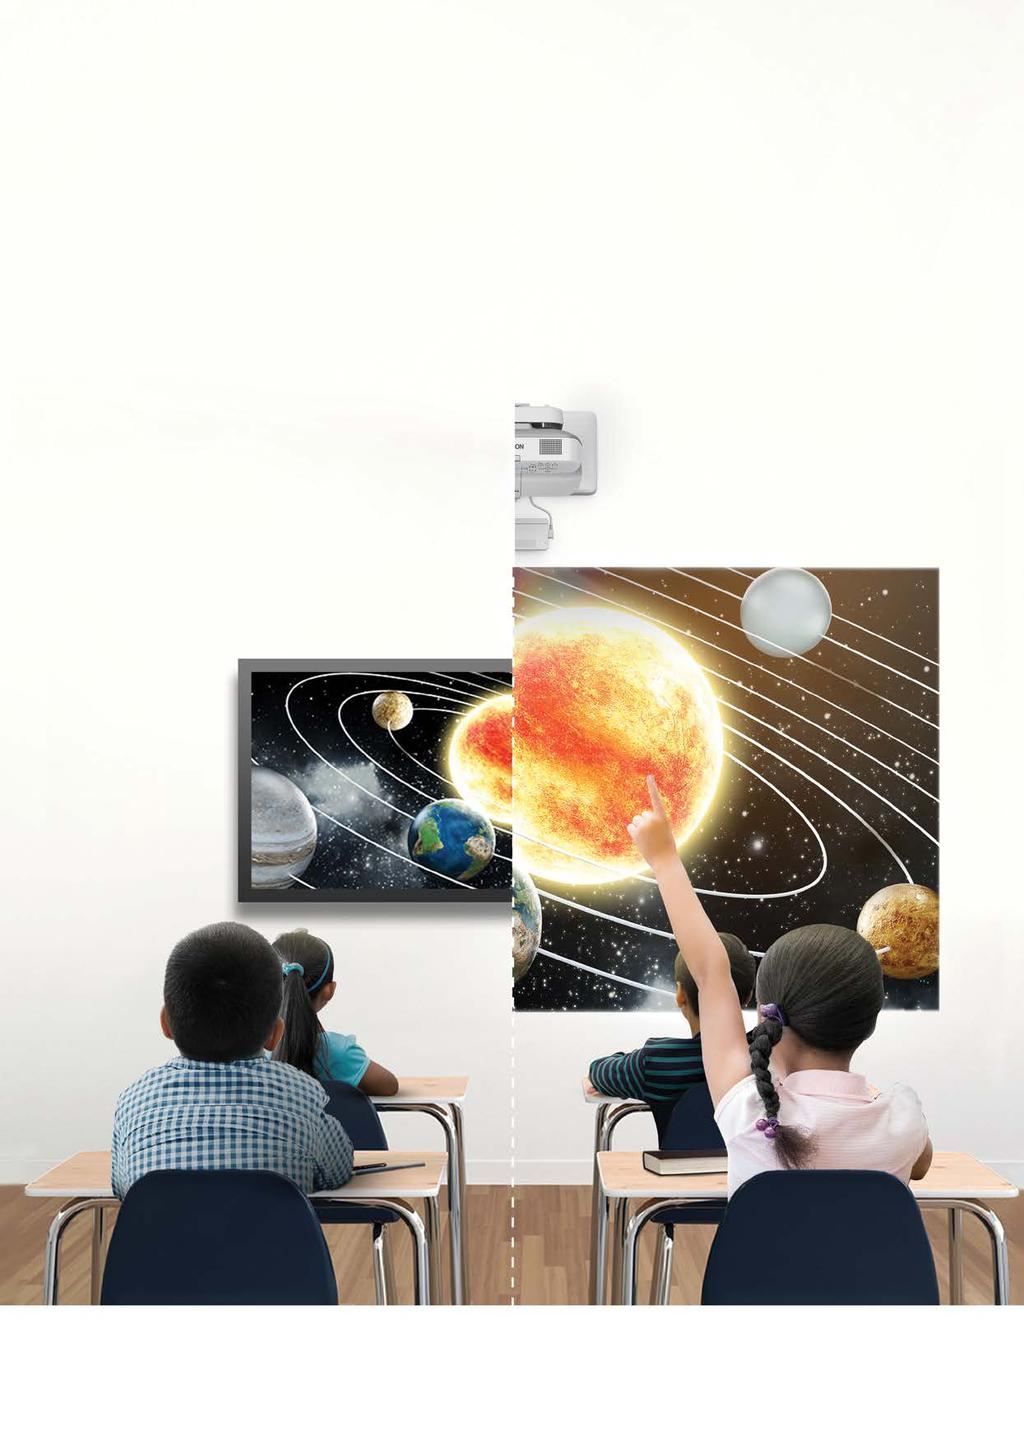 BIGGER PROJECTION. BRIGHTER FUTURE. More than half of the students are unable to read certain contents displayed on a 70" flat panel display. - Radius Research.